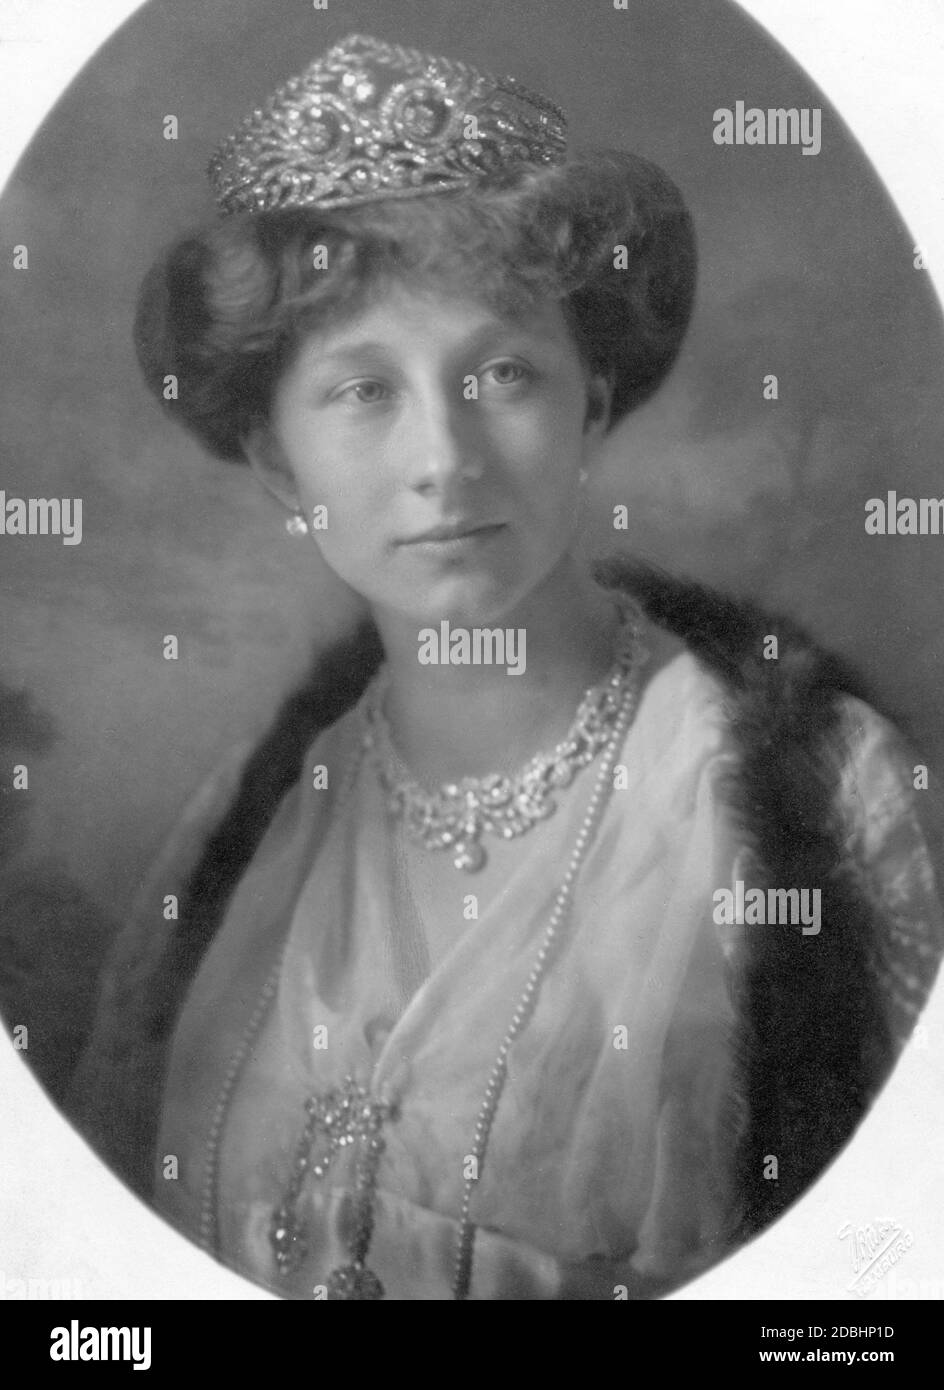 The portrait shows Princess Victoria Louise of Prussia in 1913, when she married the Duke of Brunswick, Ernst August. Photo taken by the court photographer E. Bieber in Hamburg. Stock Photo